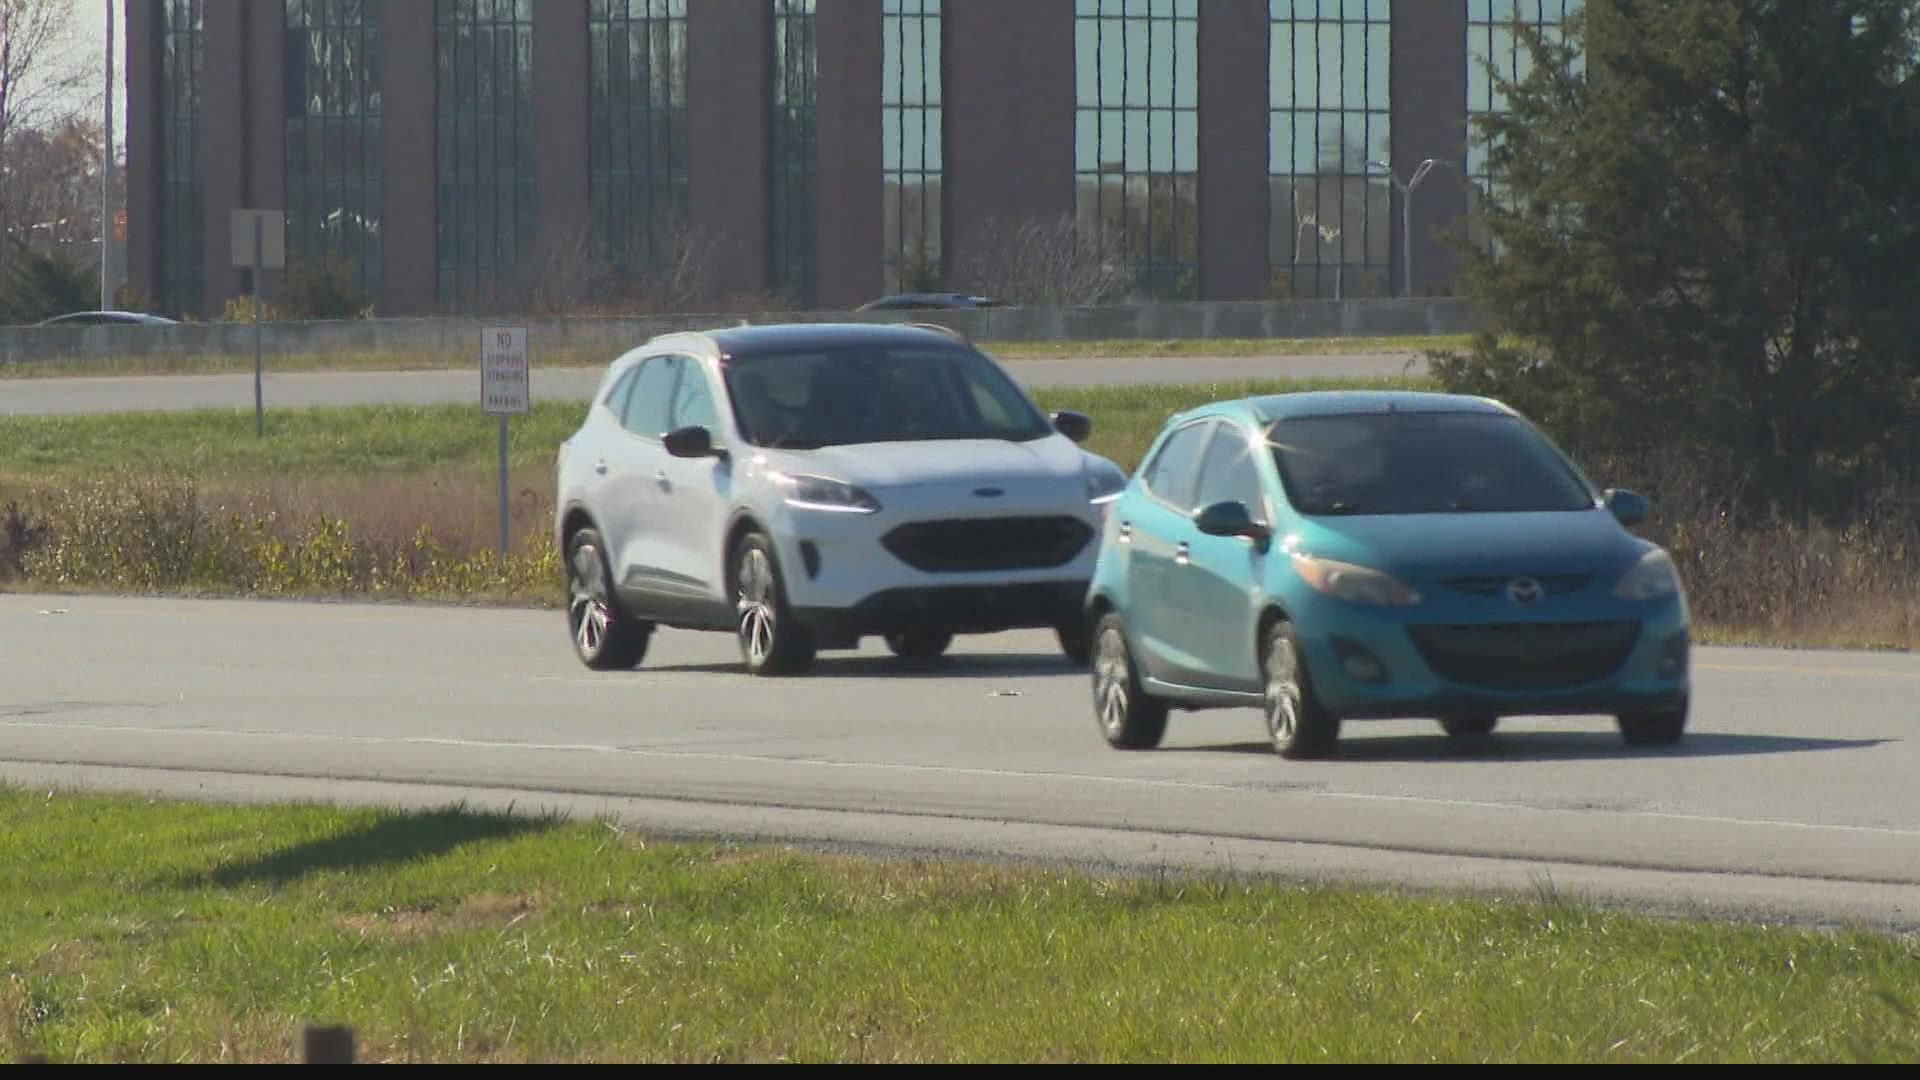 Plans are officially underway to overhaul one of the most congested areas of Indianapolis.